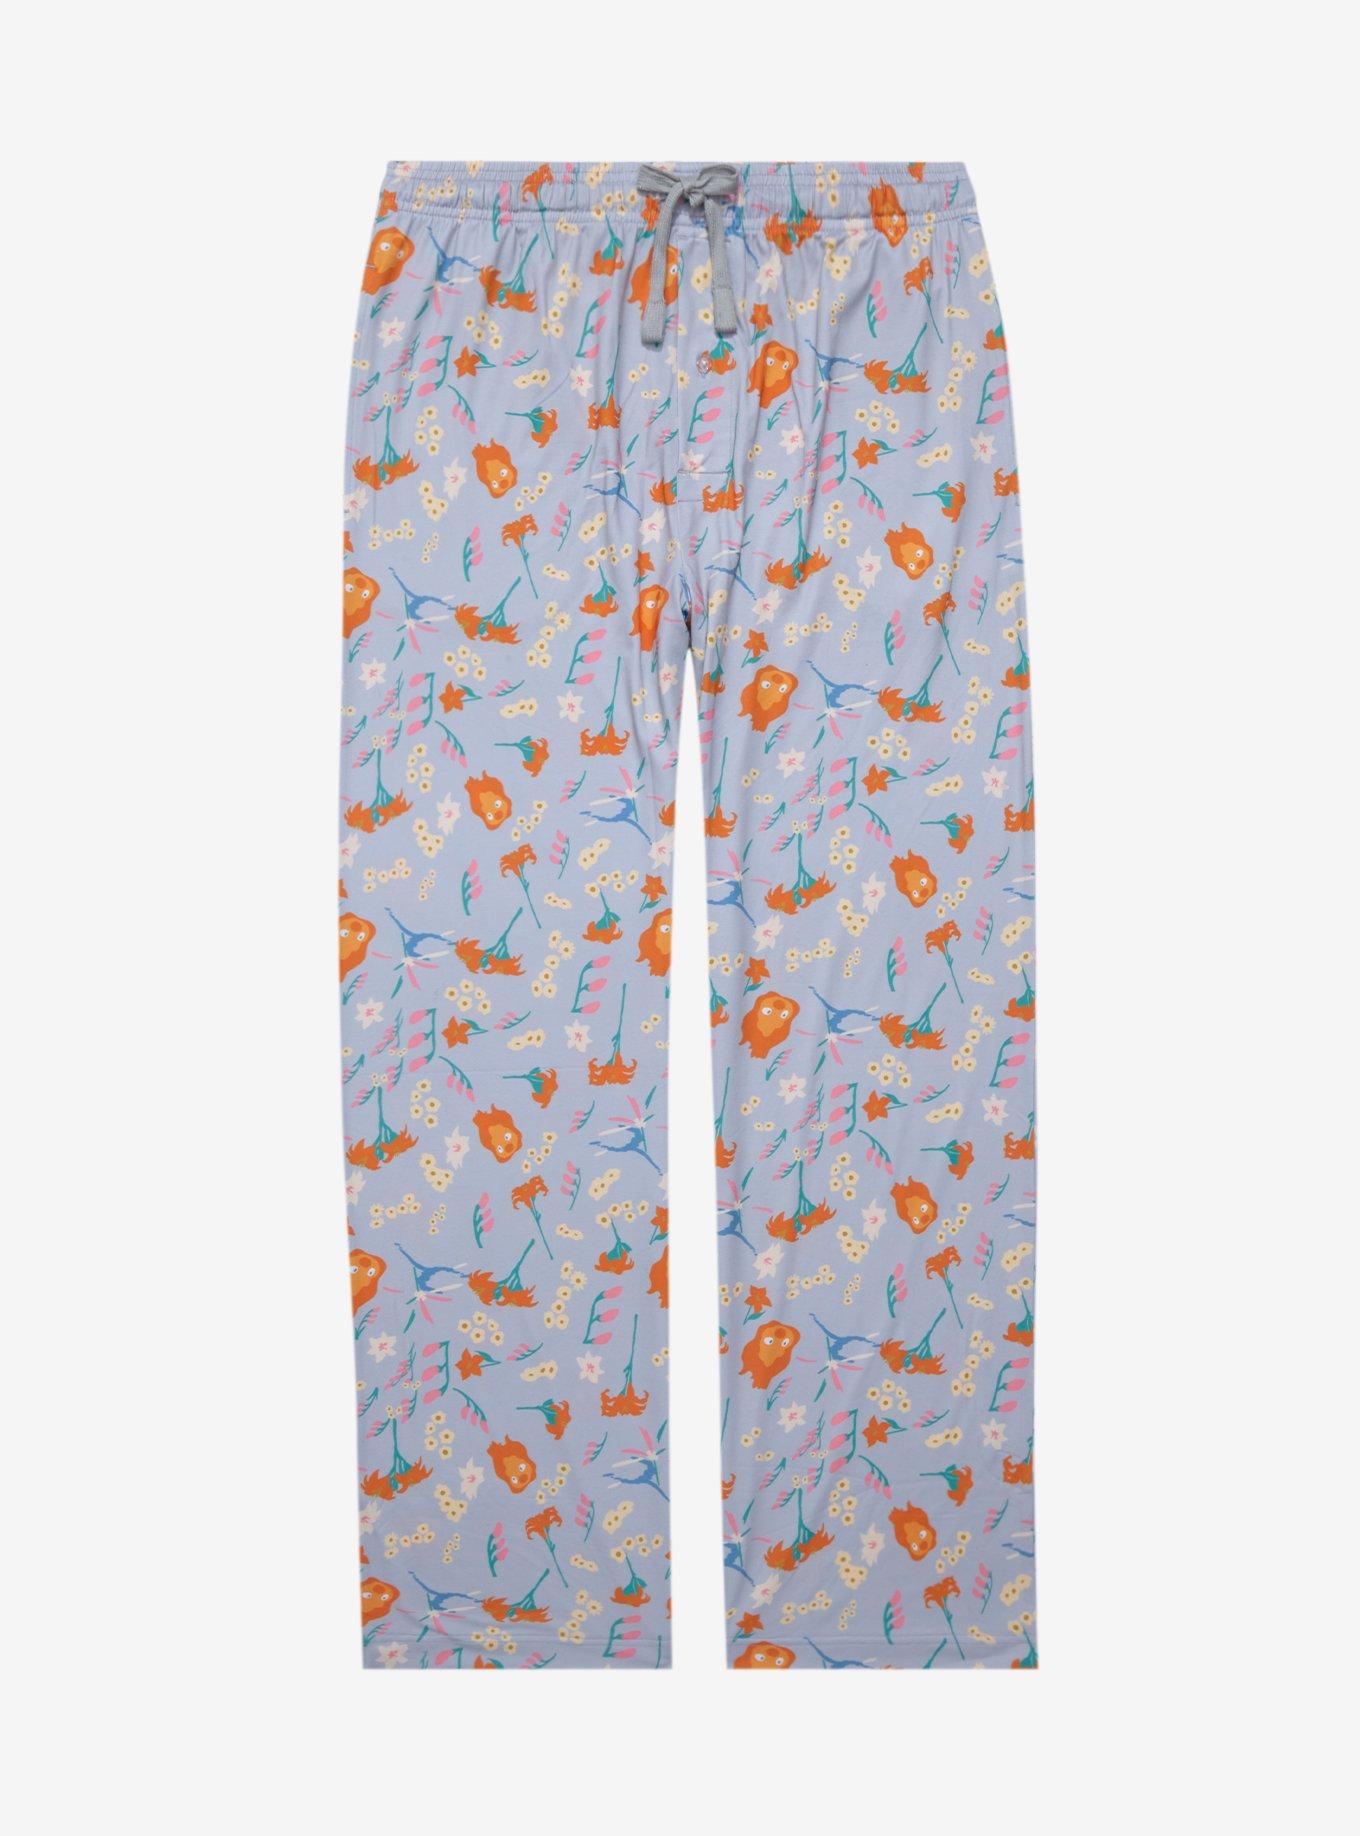 Studio Ghibli Howl’s Moving Castle Calcifer Floral Allover Print Sleep Pants - BoxLunch Exclusive